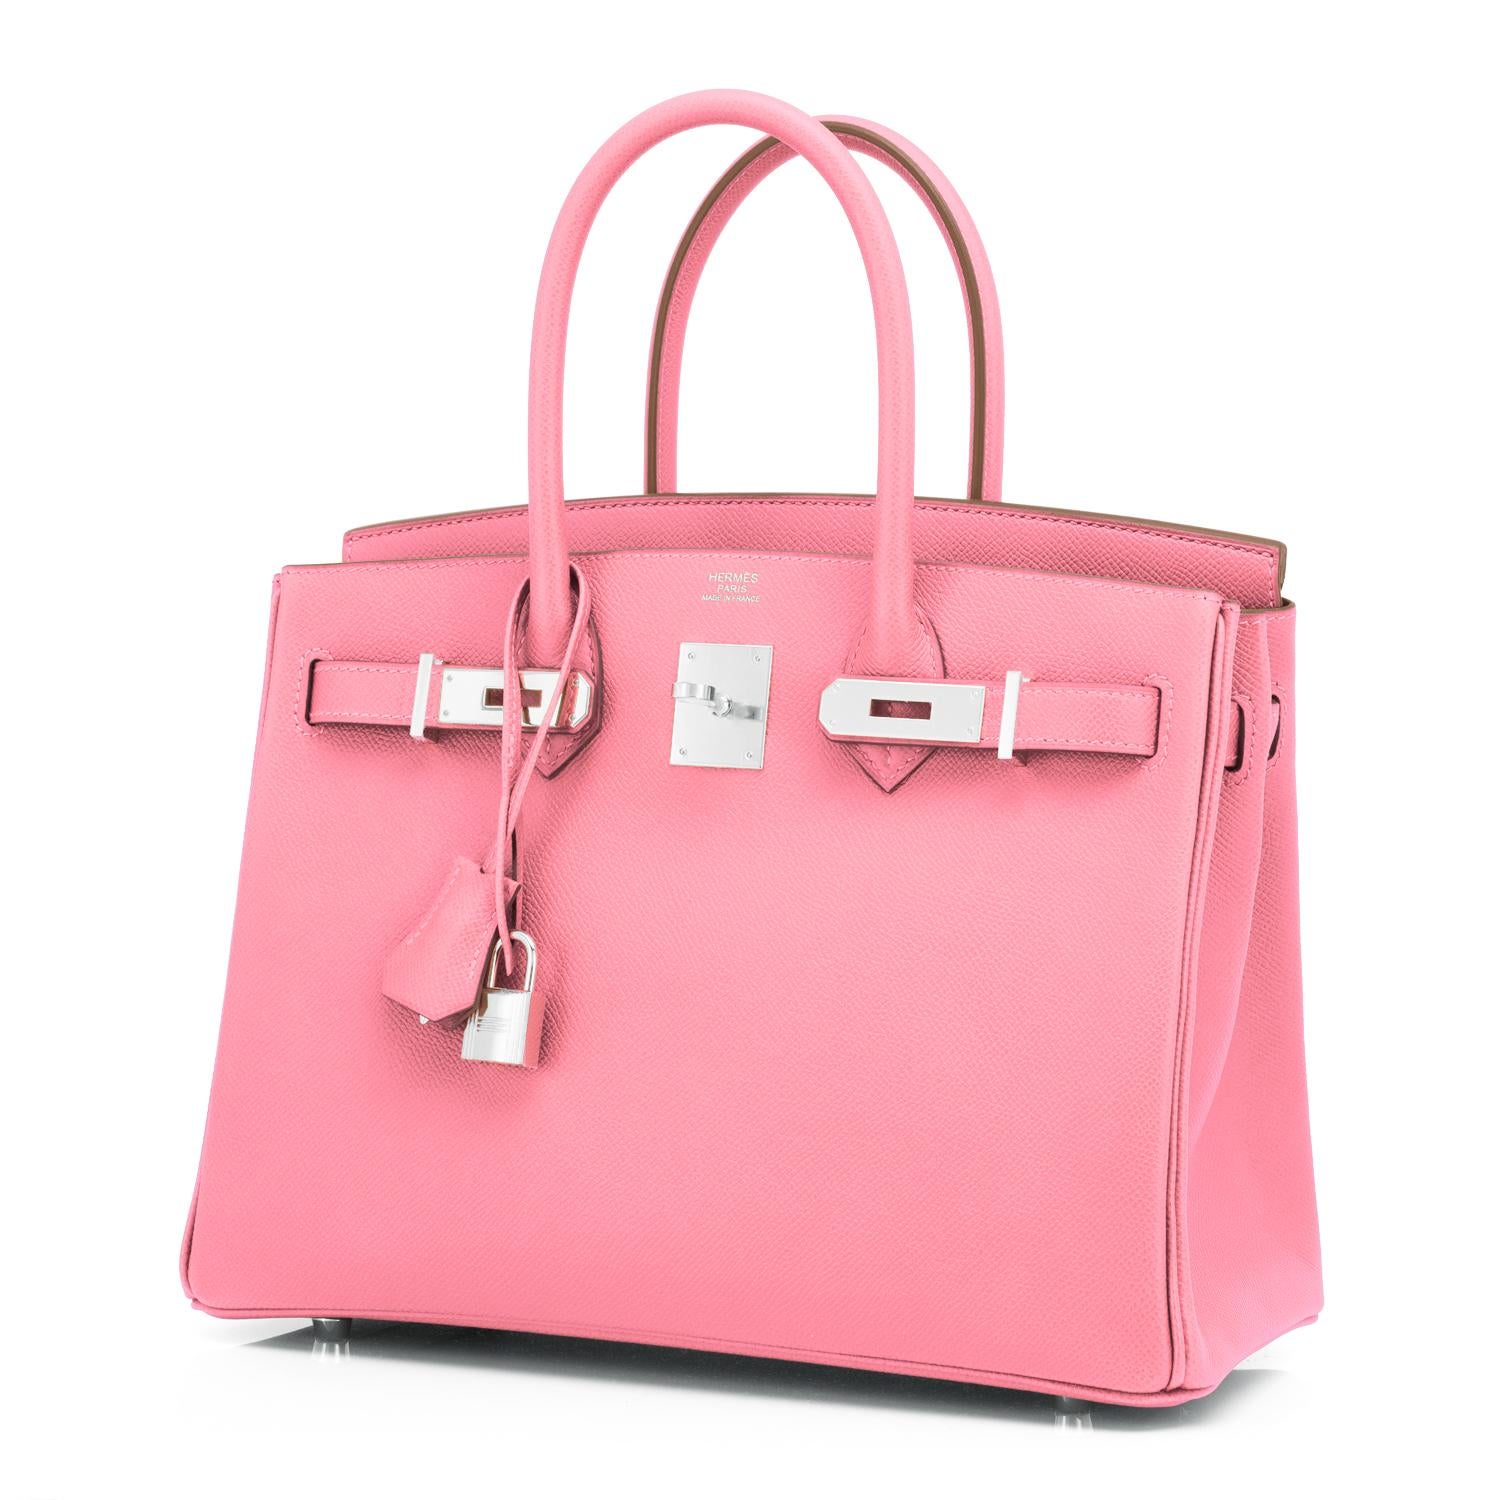 Hermes Birkin 30cm Rose Confetti Pink Epsom Palladium U Stamp, 2022
Ultimate Valentine's Gift! Very rare coveted Rose Confetti!
Brand New in Box. Store Fresh. Pristine Condition (with plastic on hardware).
Just purchased from Hermes store; bag bears